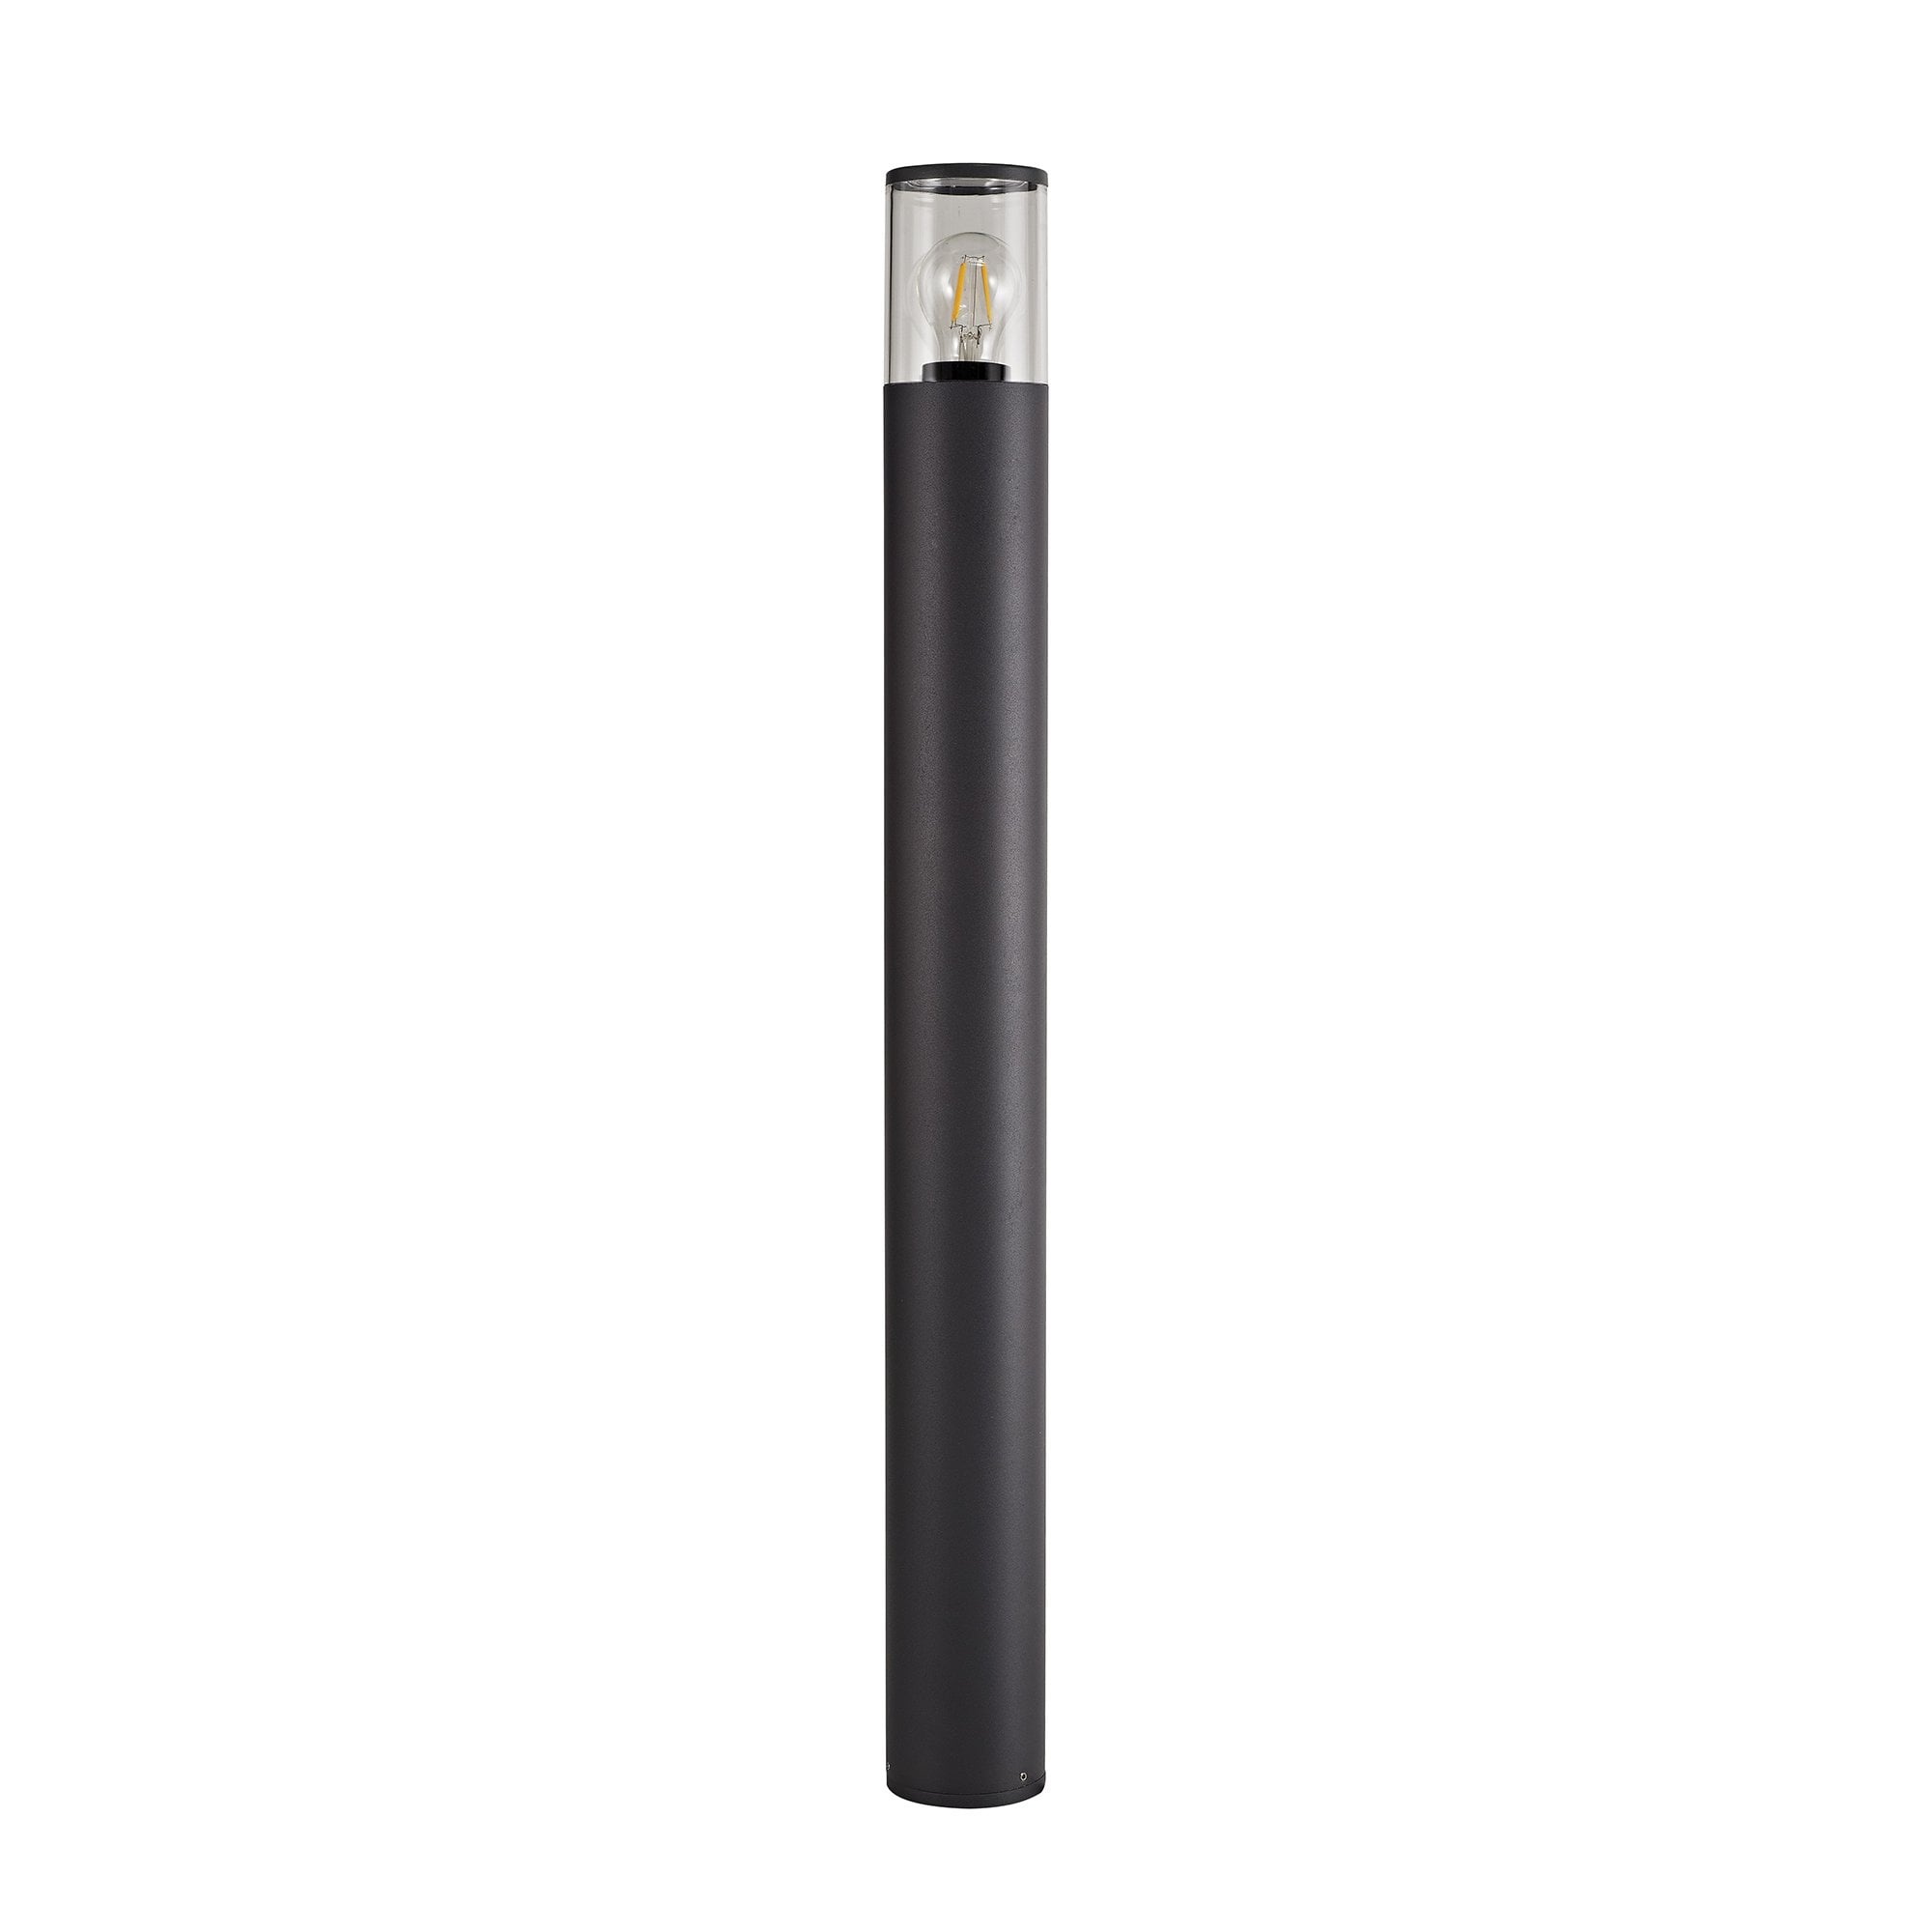 90cm Post Lamp 1 x E27, IP54, Anthracite/Clear, 2yrs Warranty